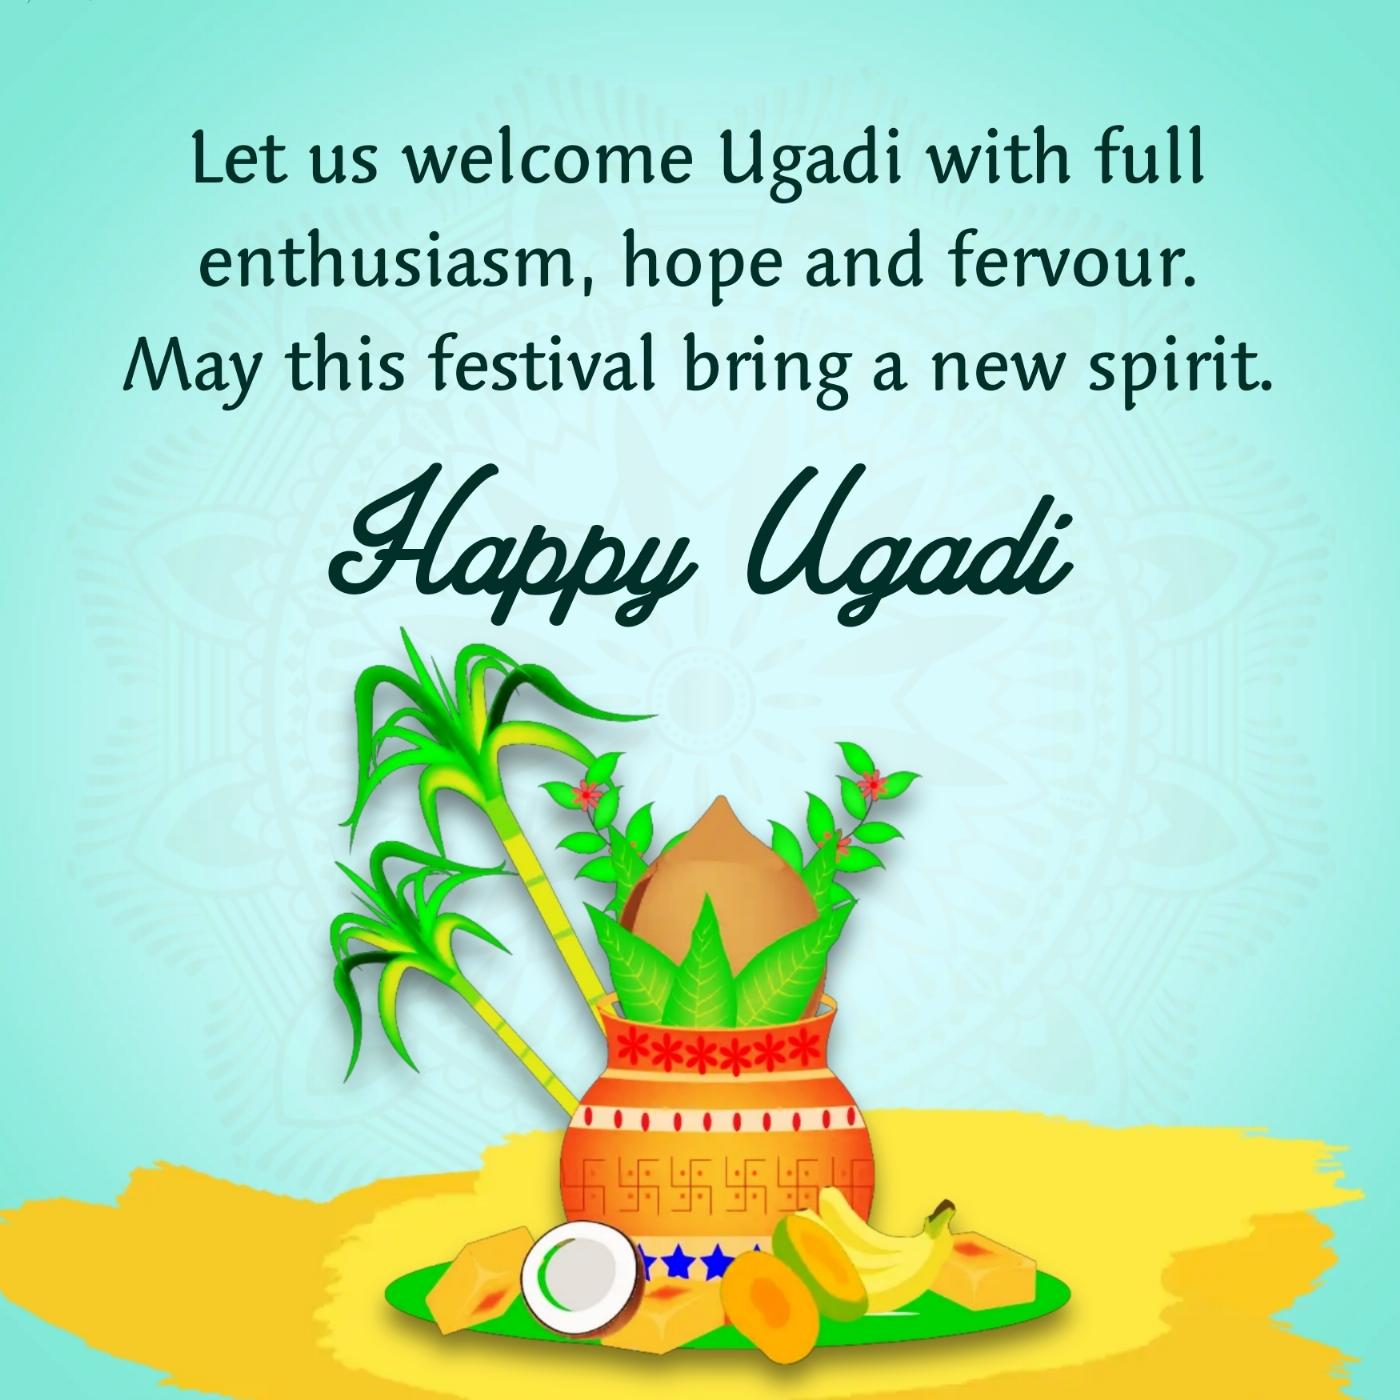 Let us welcome Ugadi with full enthusiasm hope and fervour